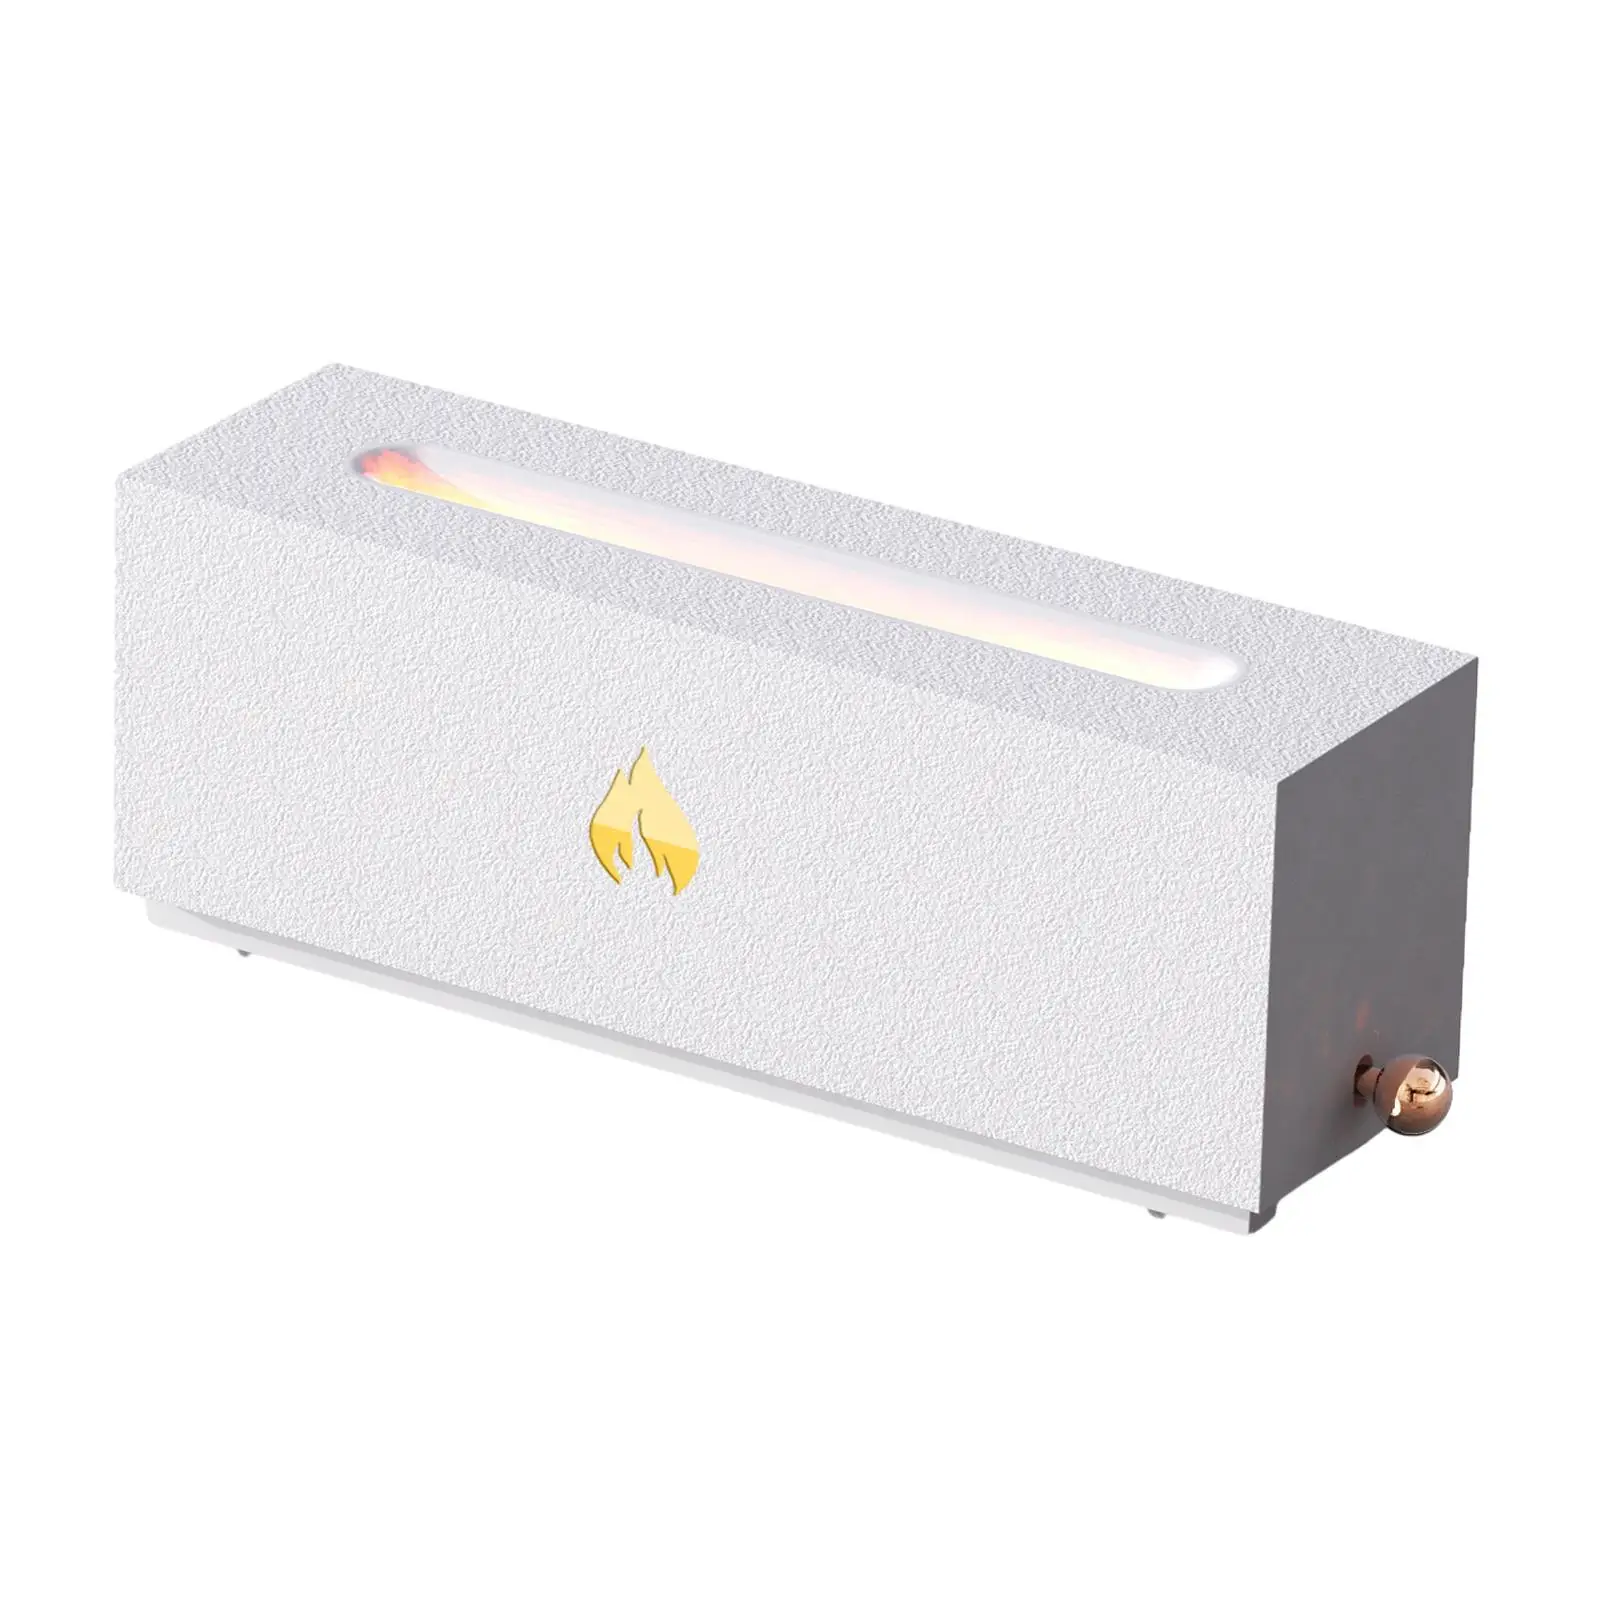 Fragrance Aroma Diffuser 3 Light Modes Humidifier for Bedroom Home Yoga